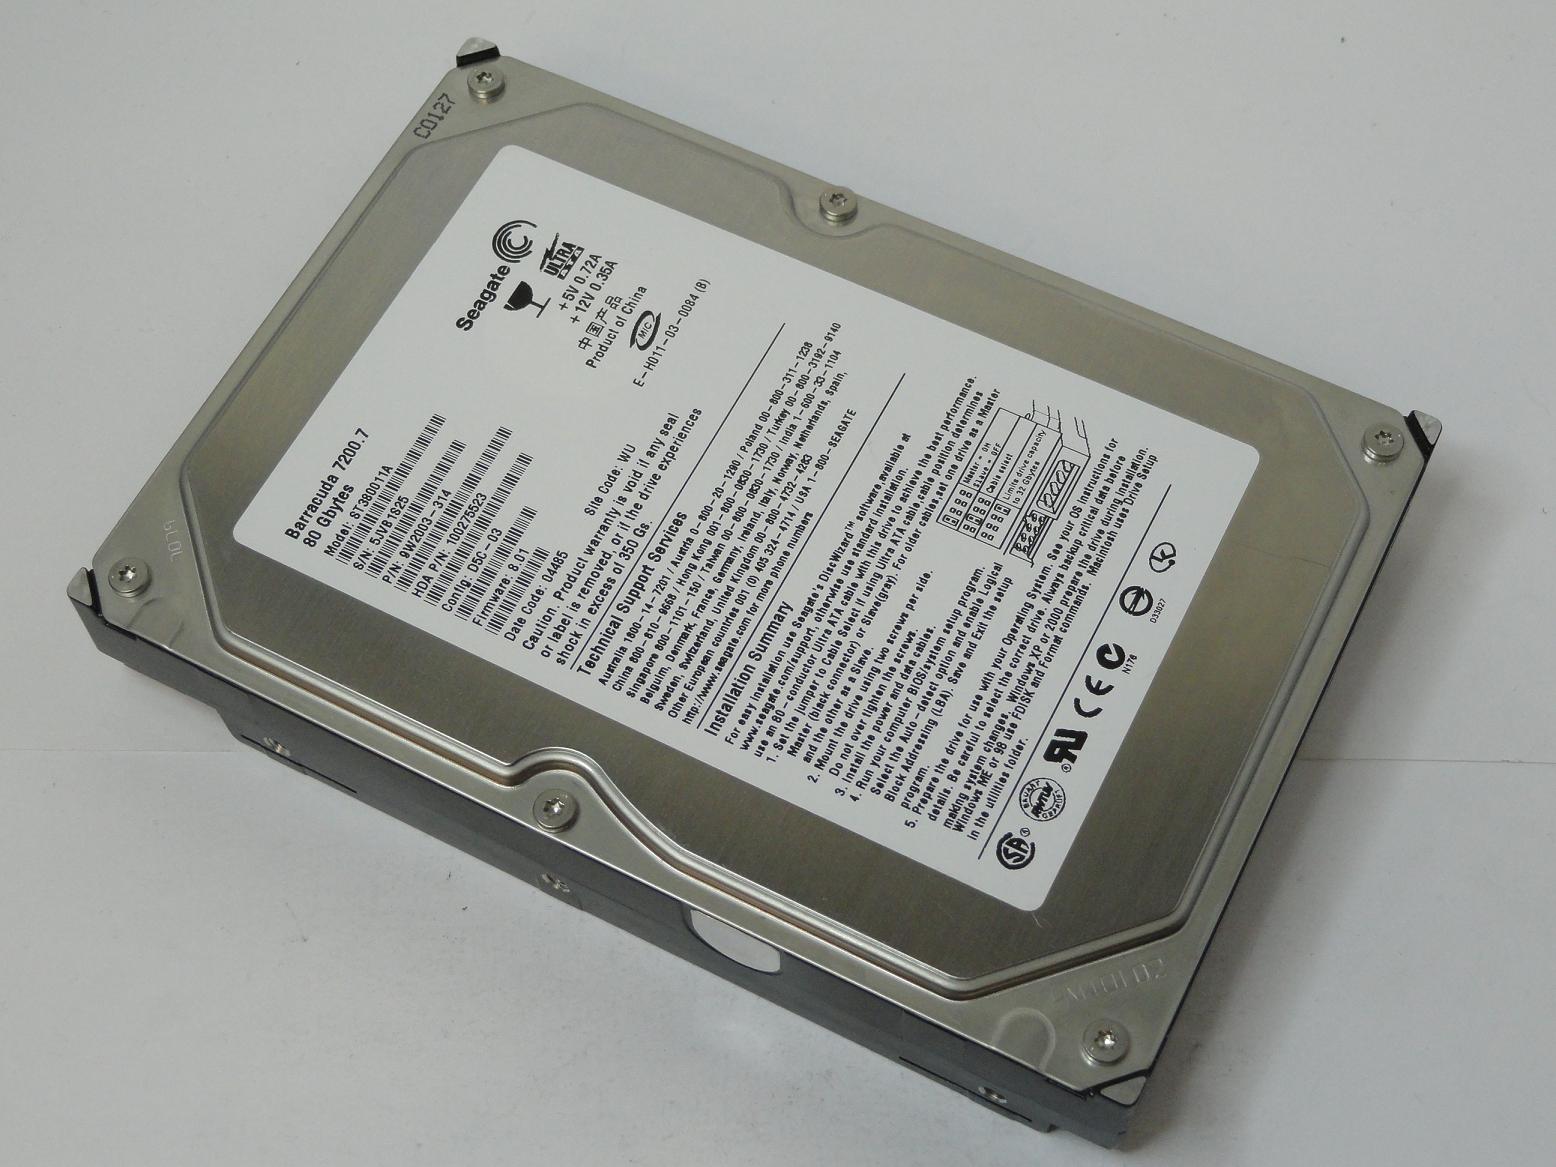 9W2003-314 - Seagate 80GB IDE 7200rpm 3.5in HDD - USED